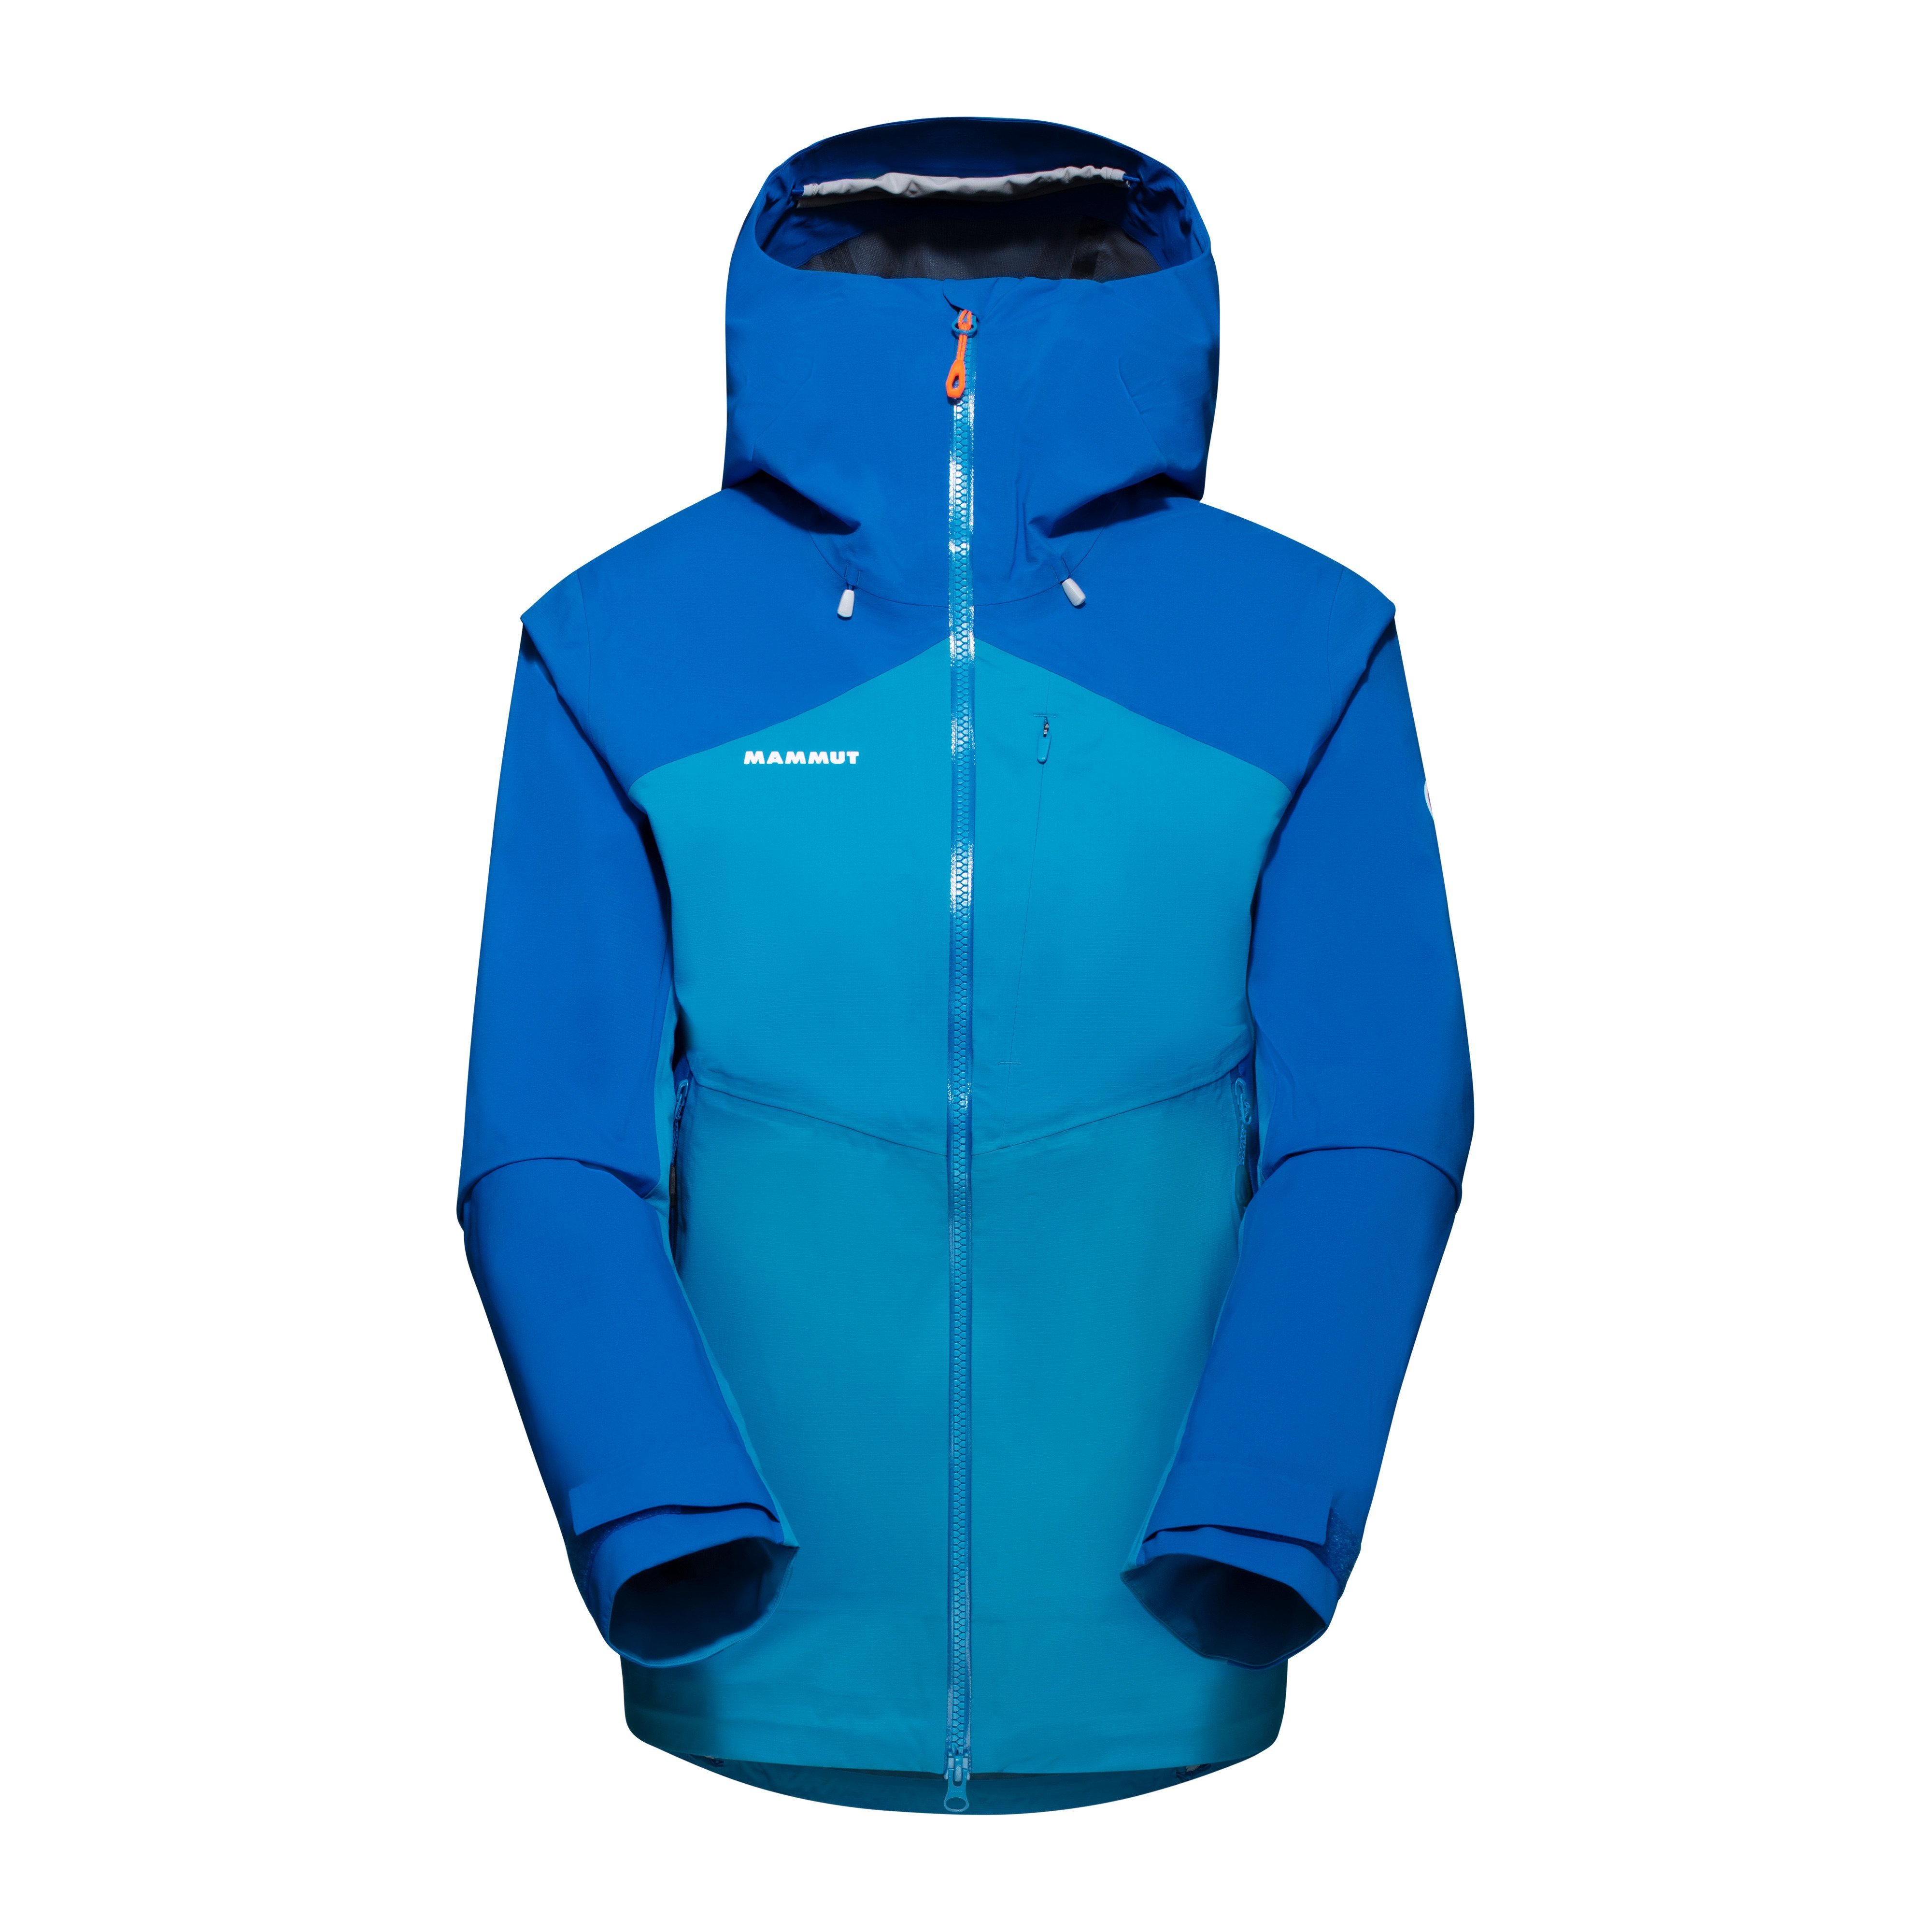 Alto Guide HS Hooded Jacket Women - gentian-ice, S product image